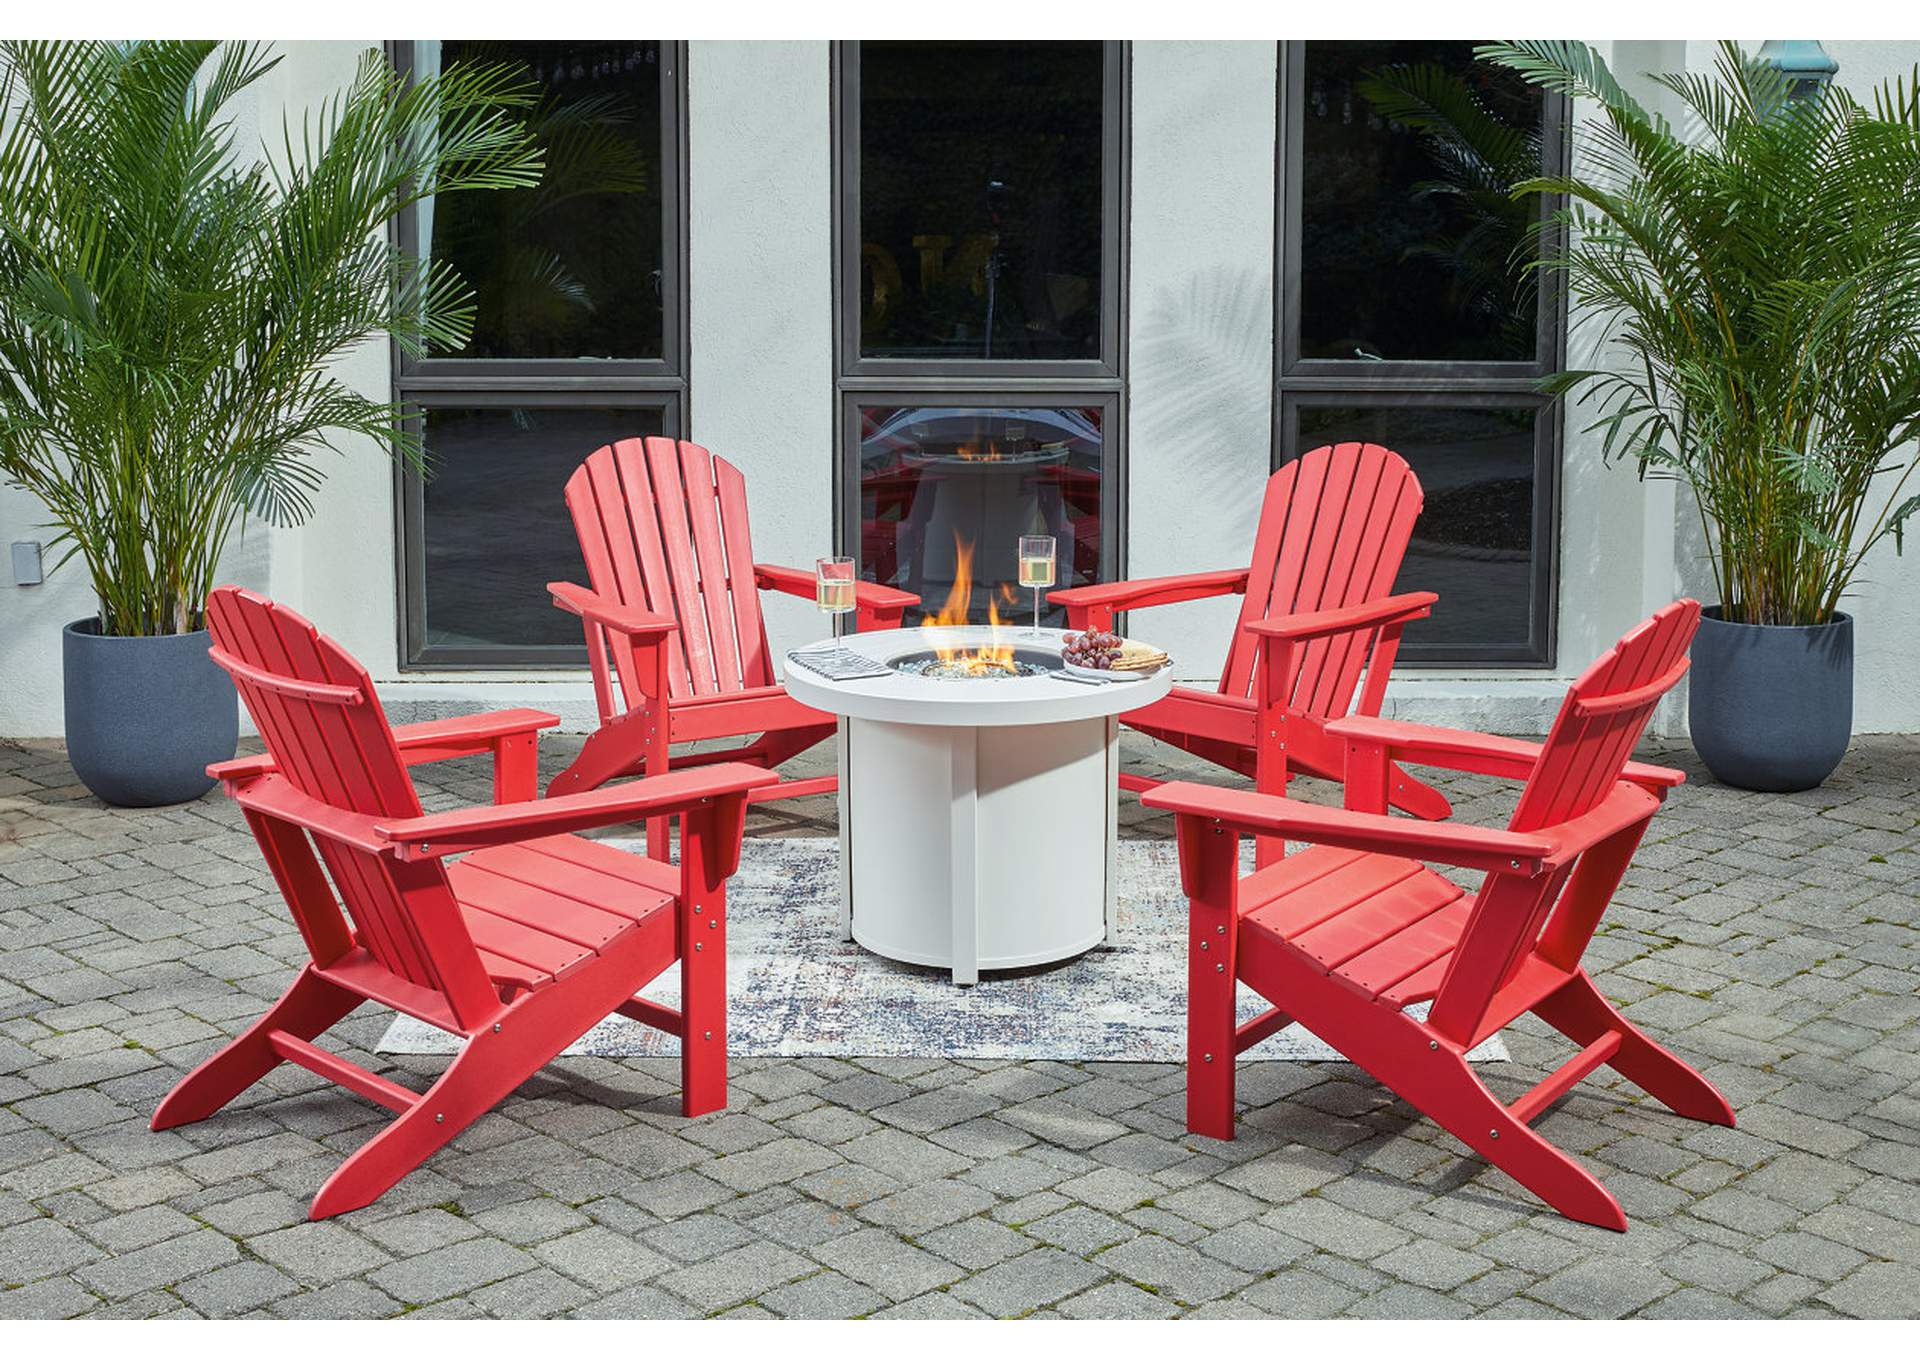 Sundown Treasure Outdoor Fire Pit Table and 4 Chairs,Outdoor By Ashley